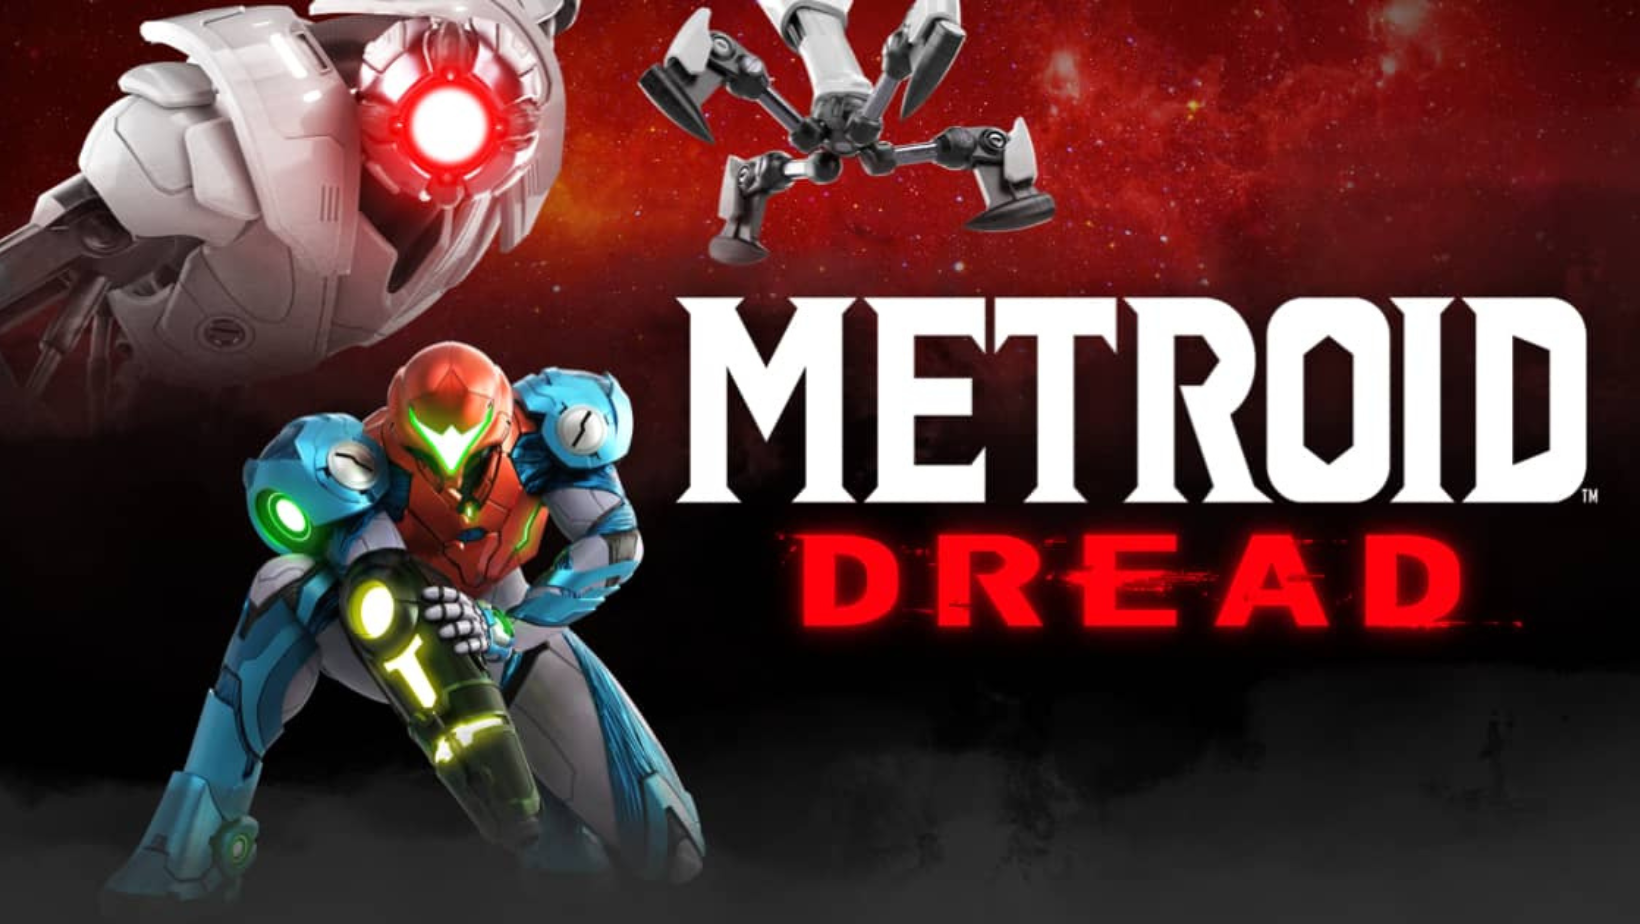 Metroid Dread Refuses To Get Off The Top Spot For Best-Selling Video Games On Amazon